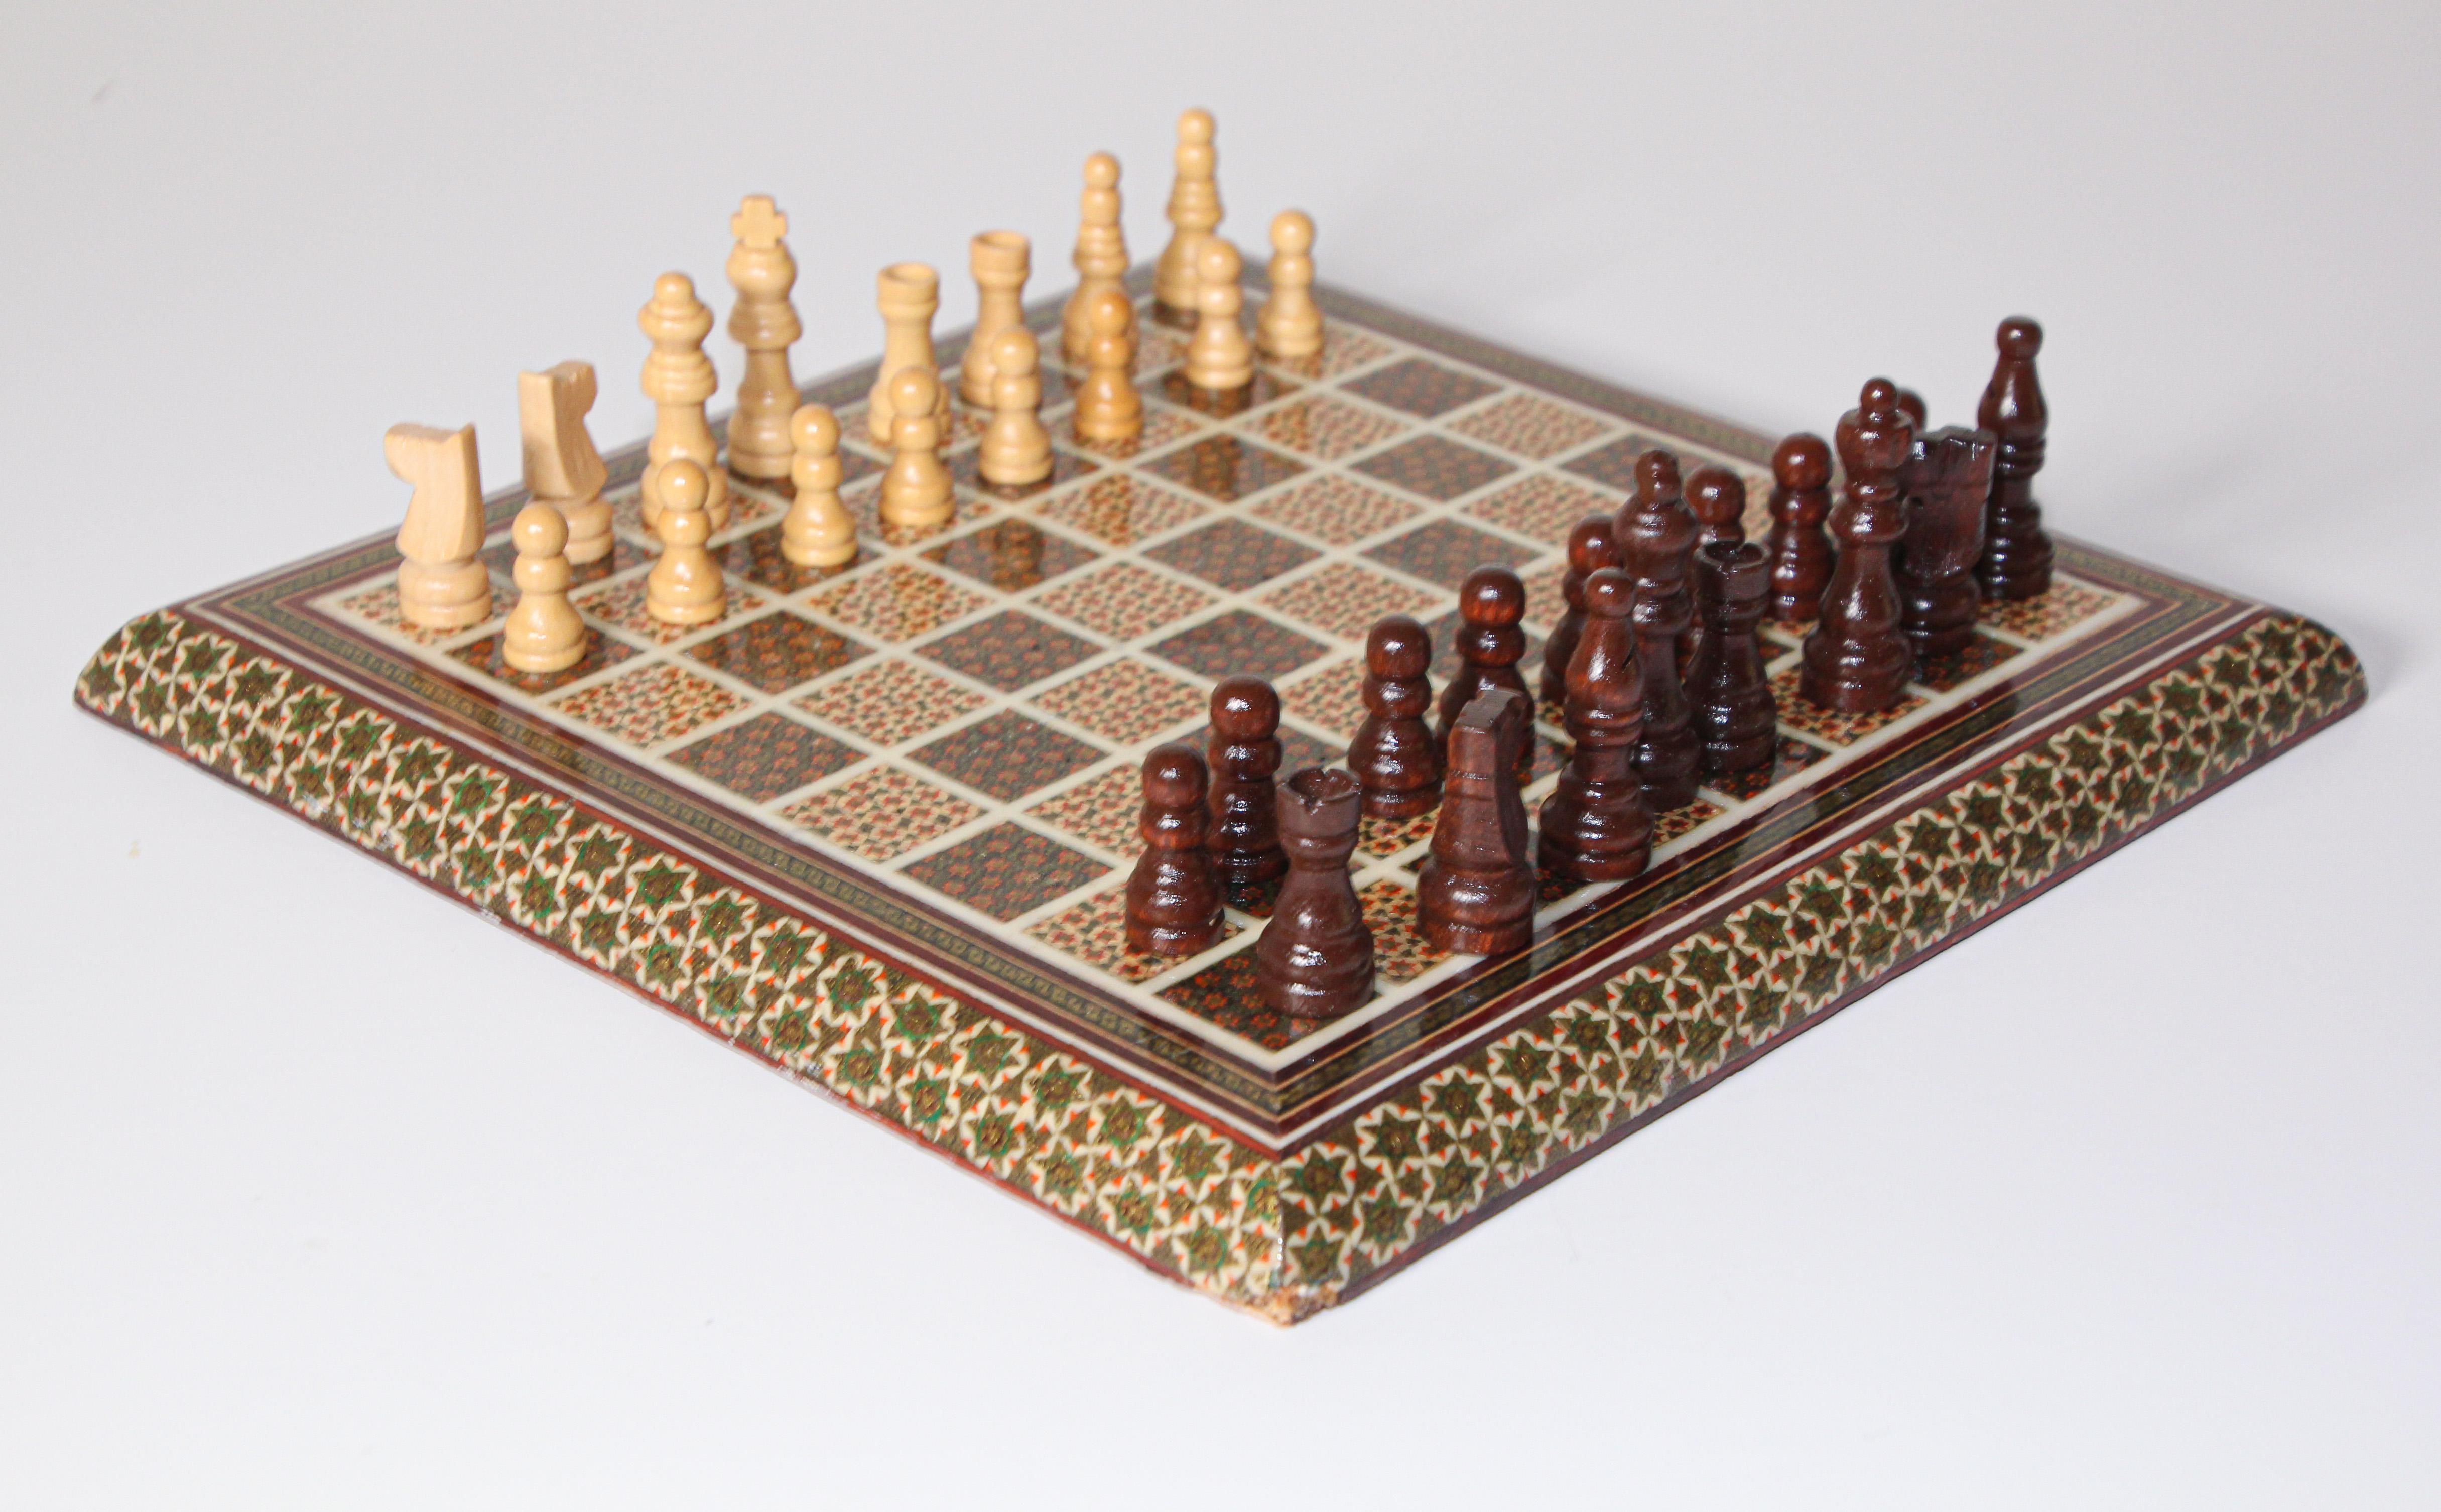 20th Century Middle Eastern Persian Khatam Chess Game